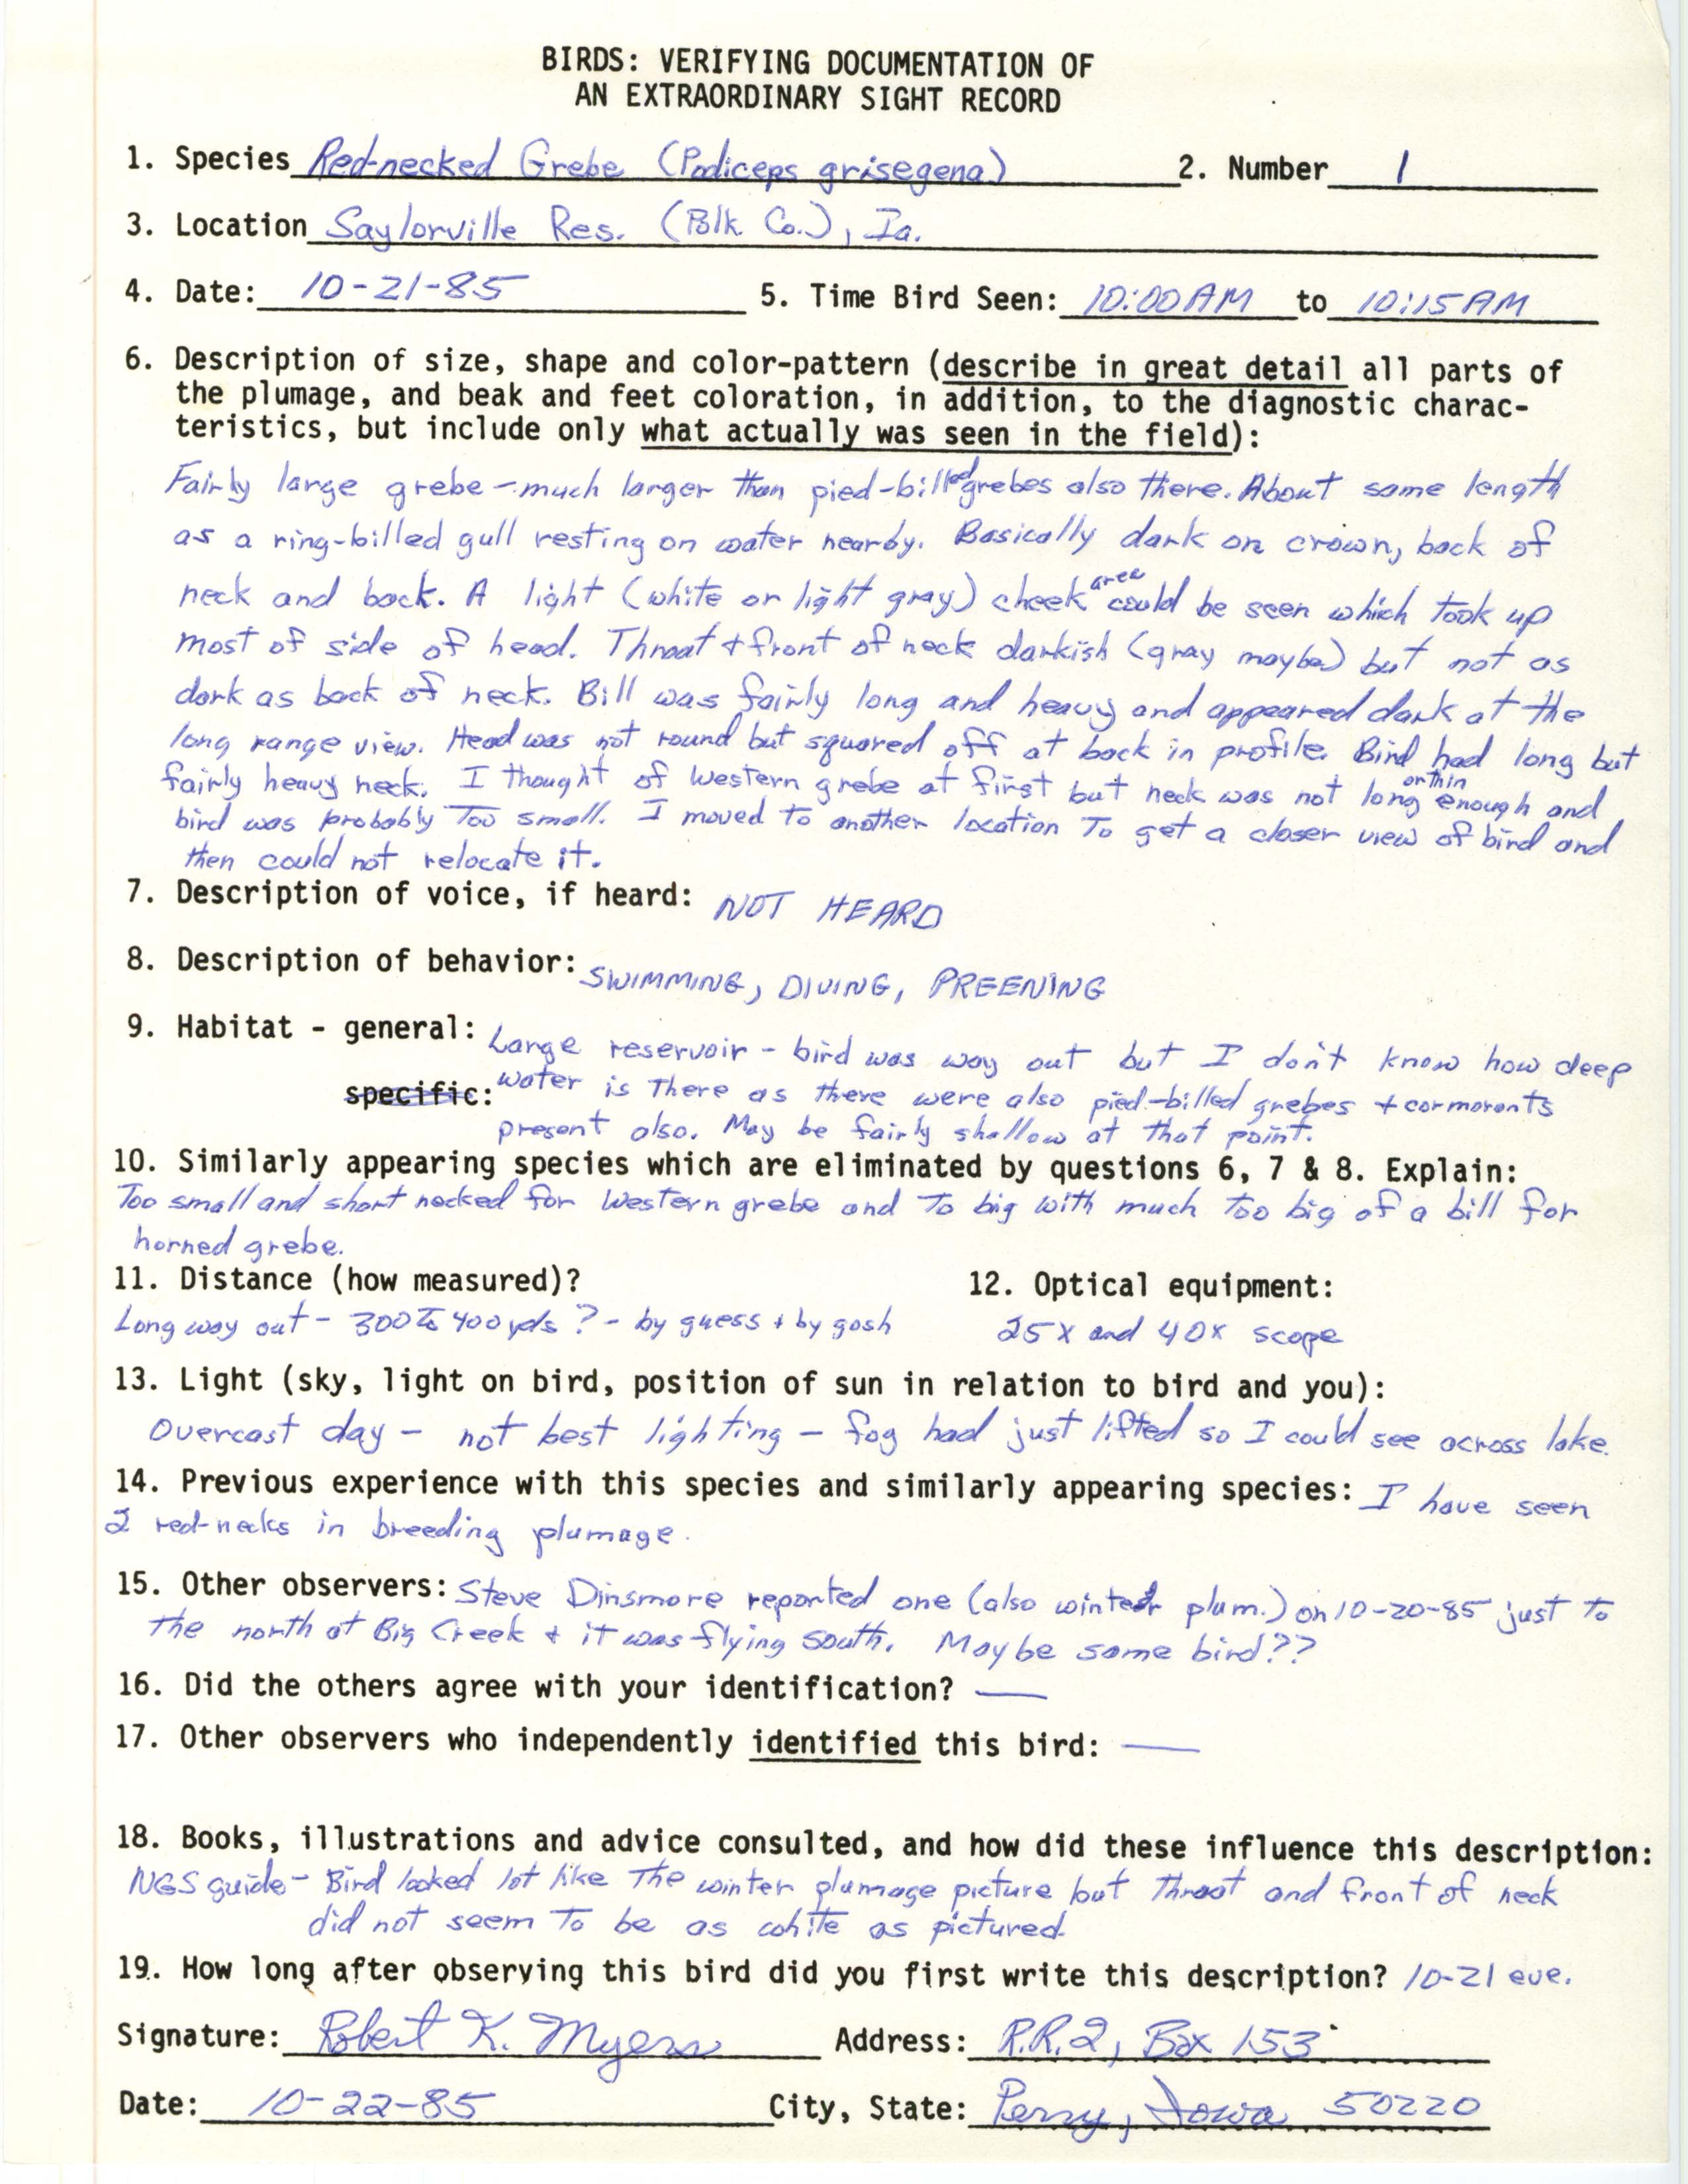 Rare bird documentation form for Red-necked Grebe at Saylorville Reservoir, 1985